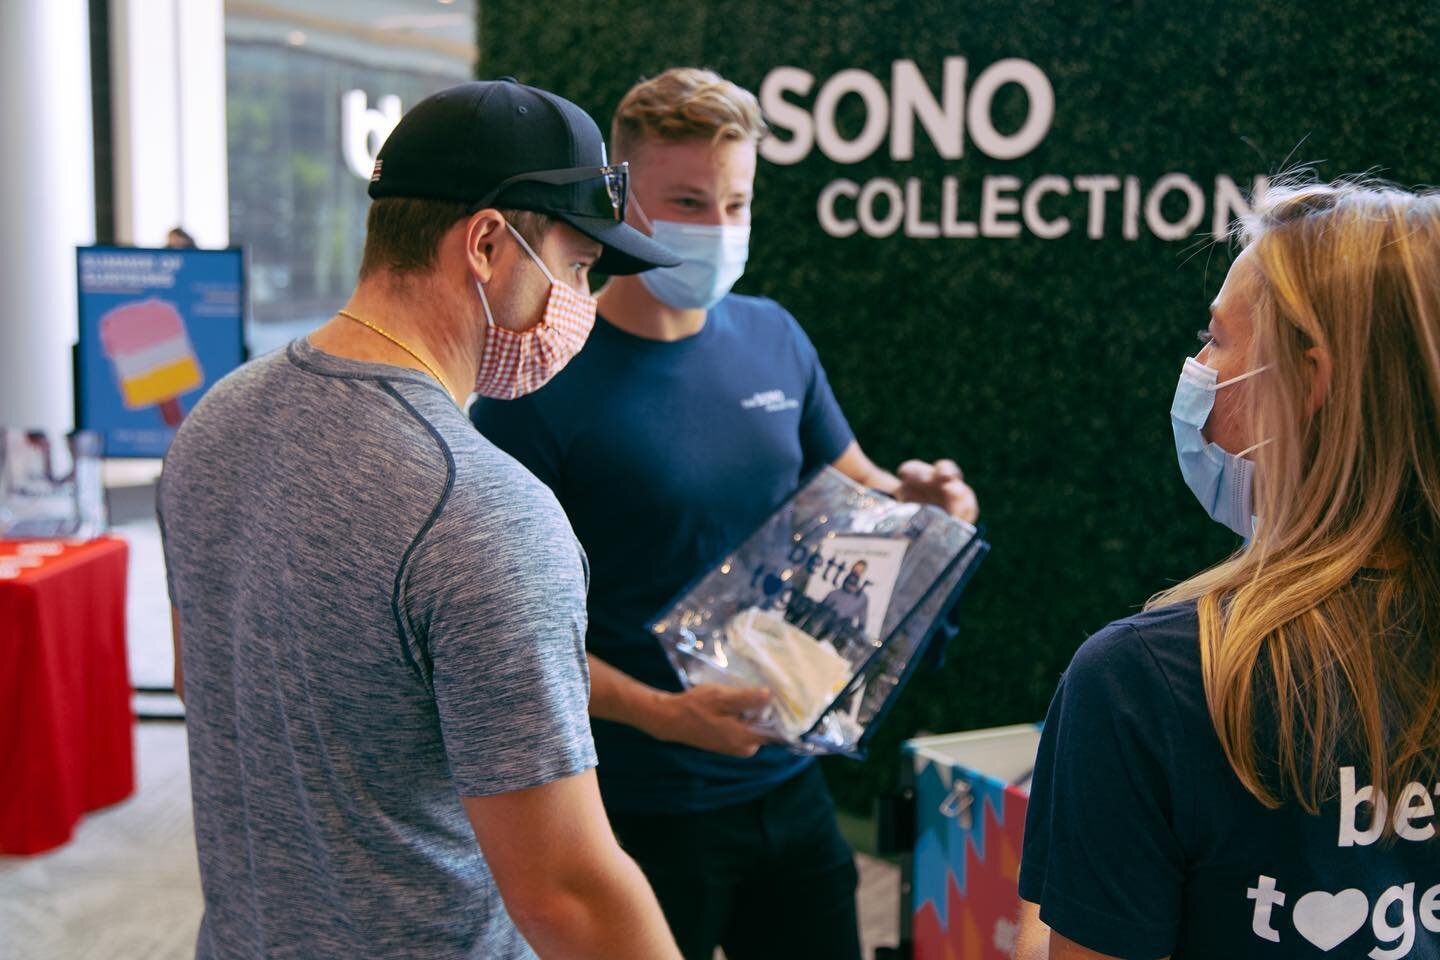 Check out the Summer of Surprises at the @the.sono.collection every Saturday! #xosono 
.
.
.
.
#sebass #sebassevents #brand #brandambassador #customevents #promotions #collection #events #covidsafe #bettertogether